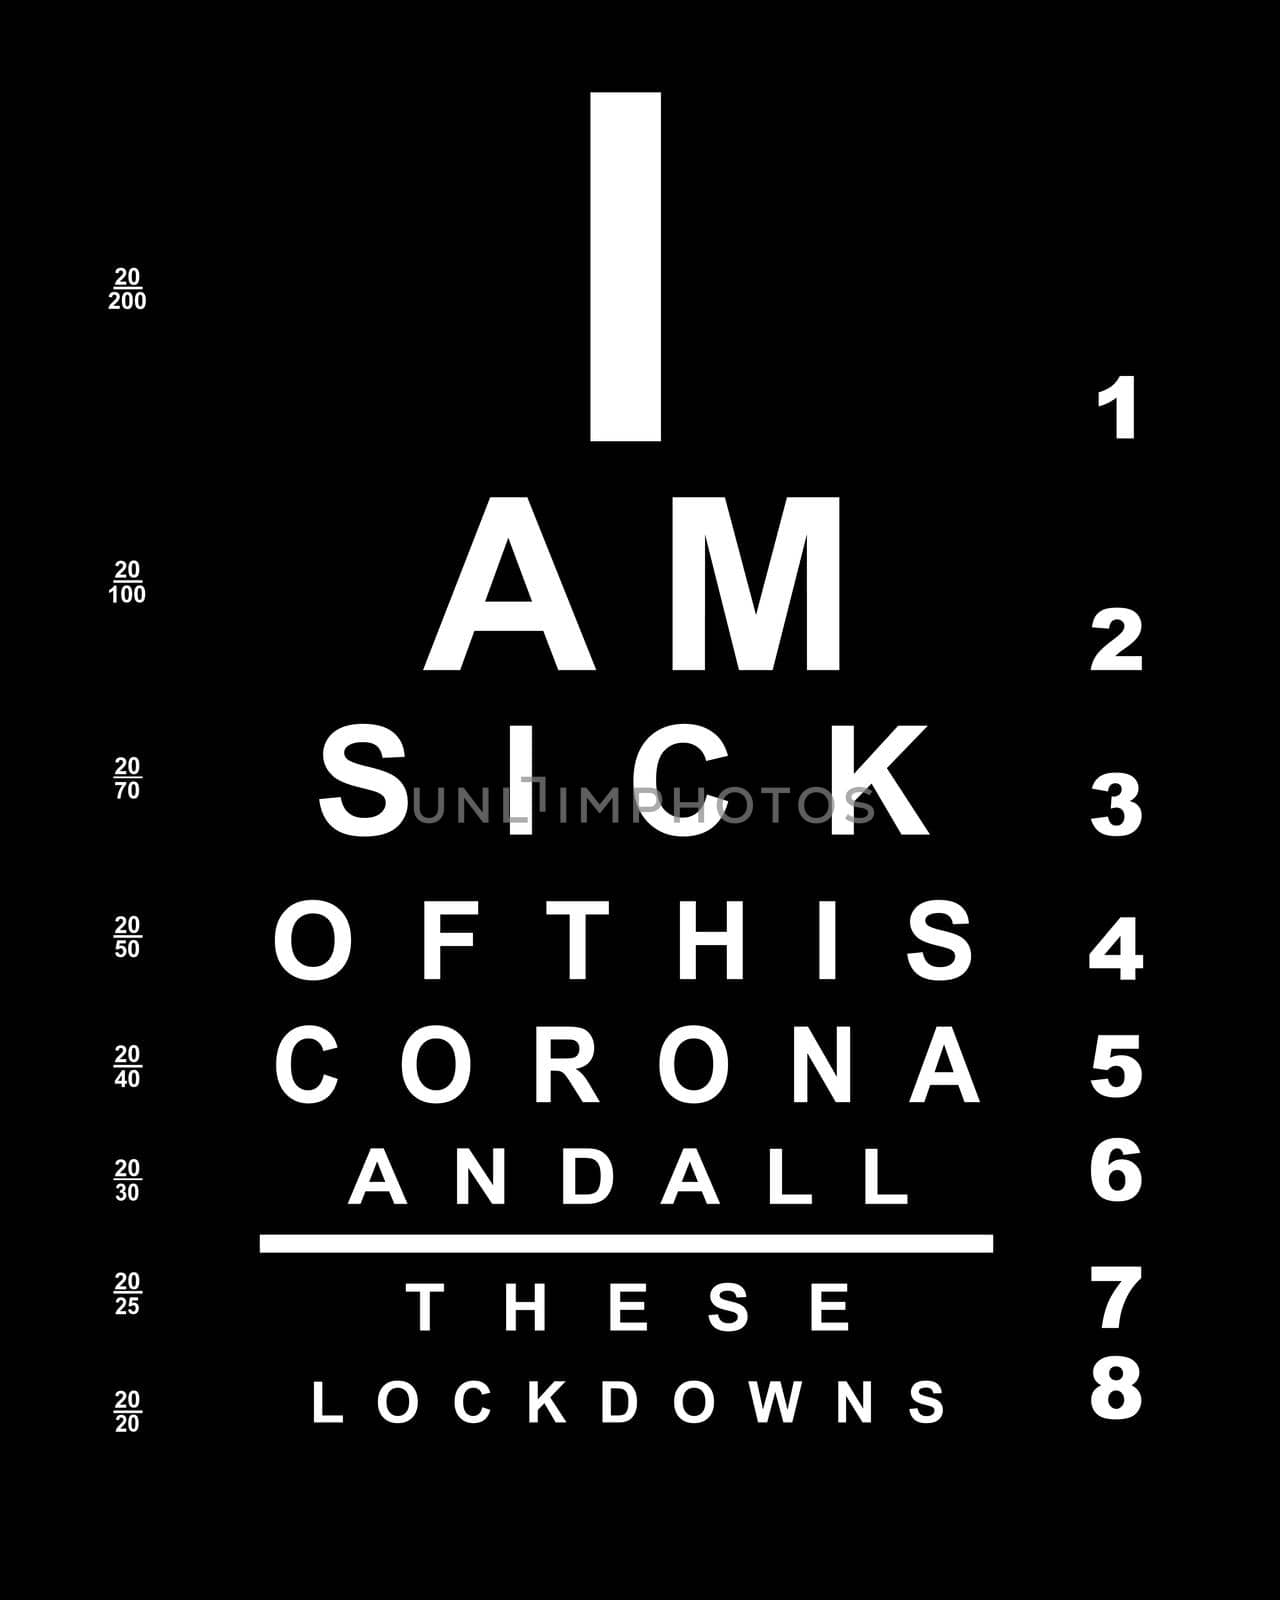 A eye chart with the text "I am sick of this corna and all these lockdowns